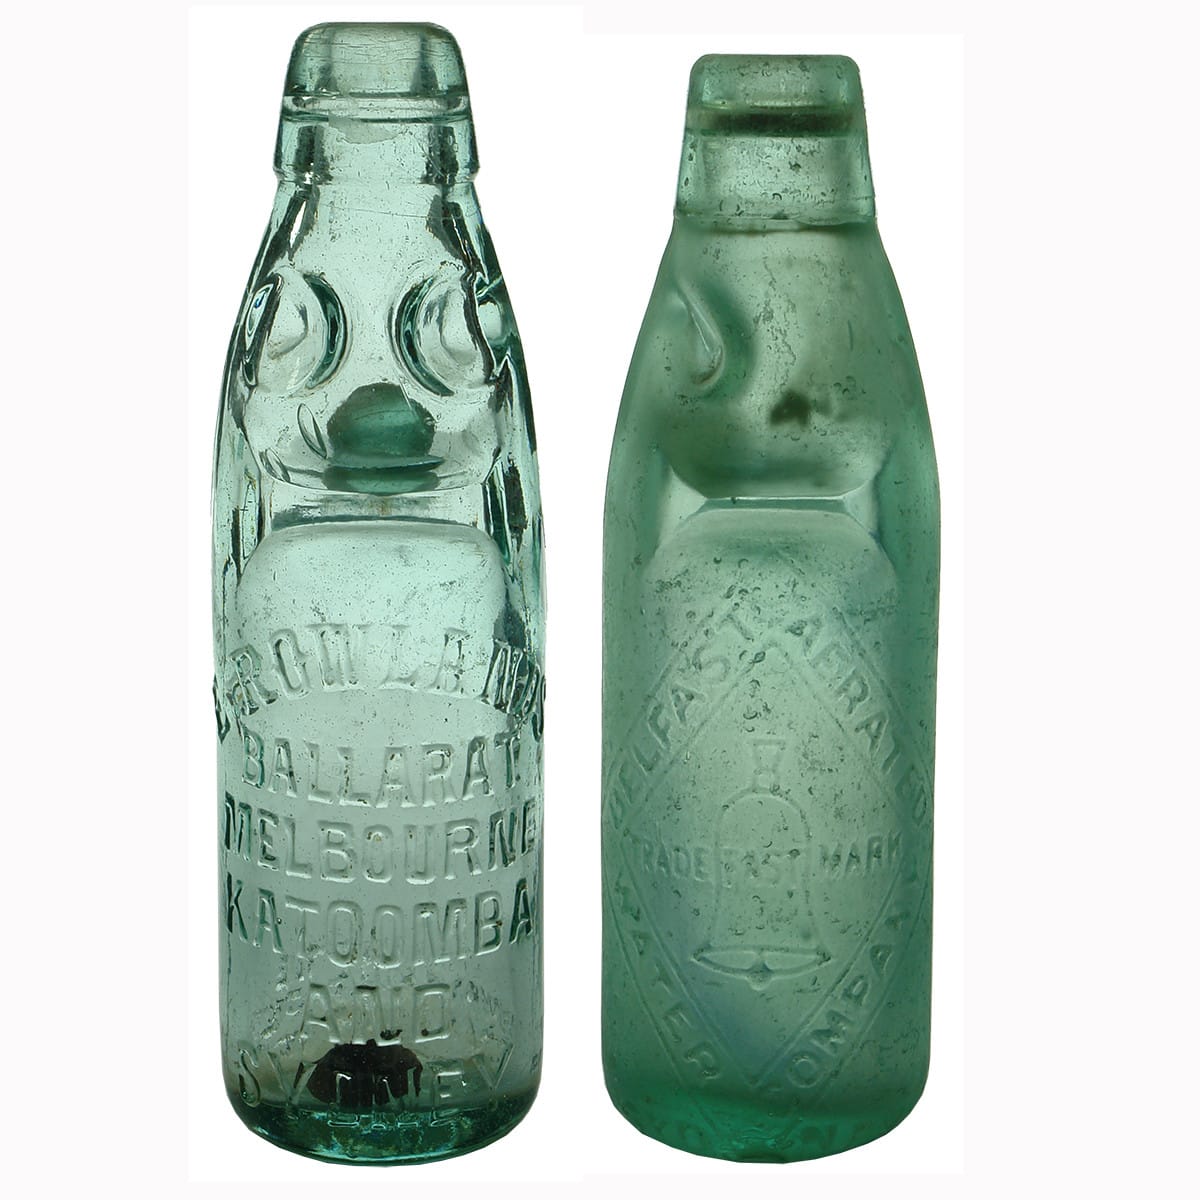 Pair of Codds: Rowlands and Belfast Aerated Water Co.